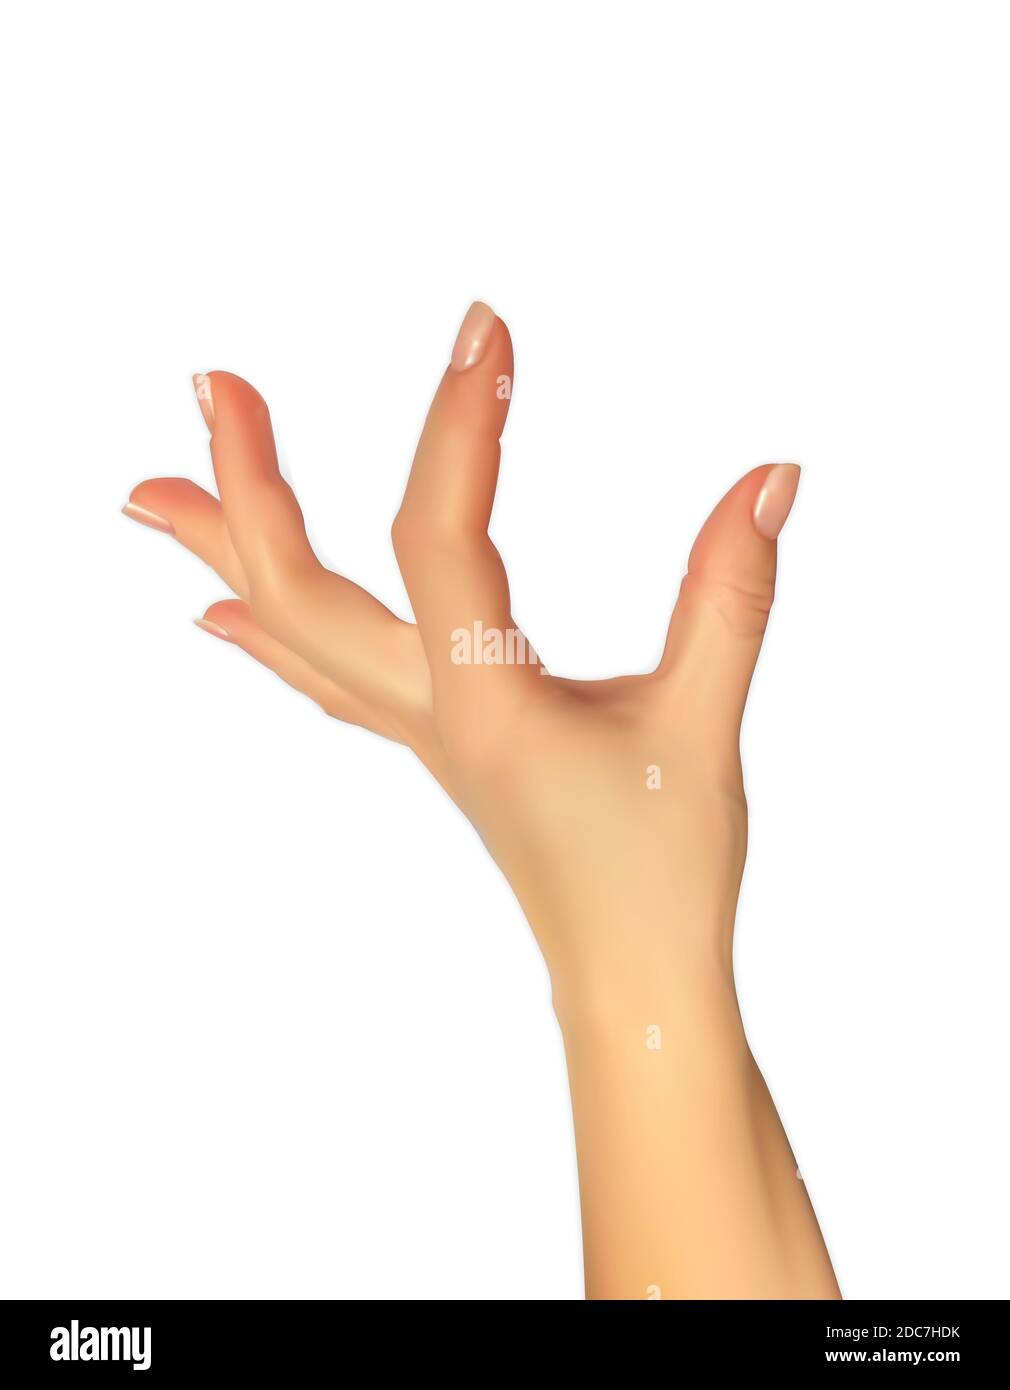 Realistic 3D Silhouette of hand showing the size your fingers, the ability to insert something. Illustration. Stock Photo